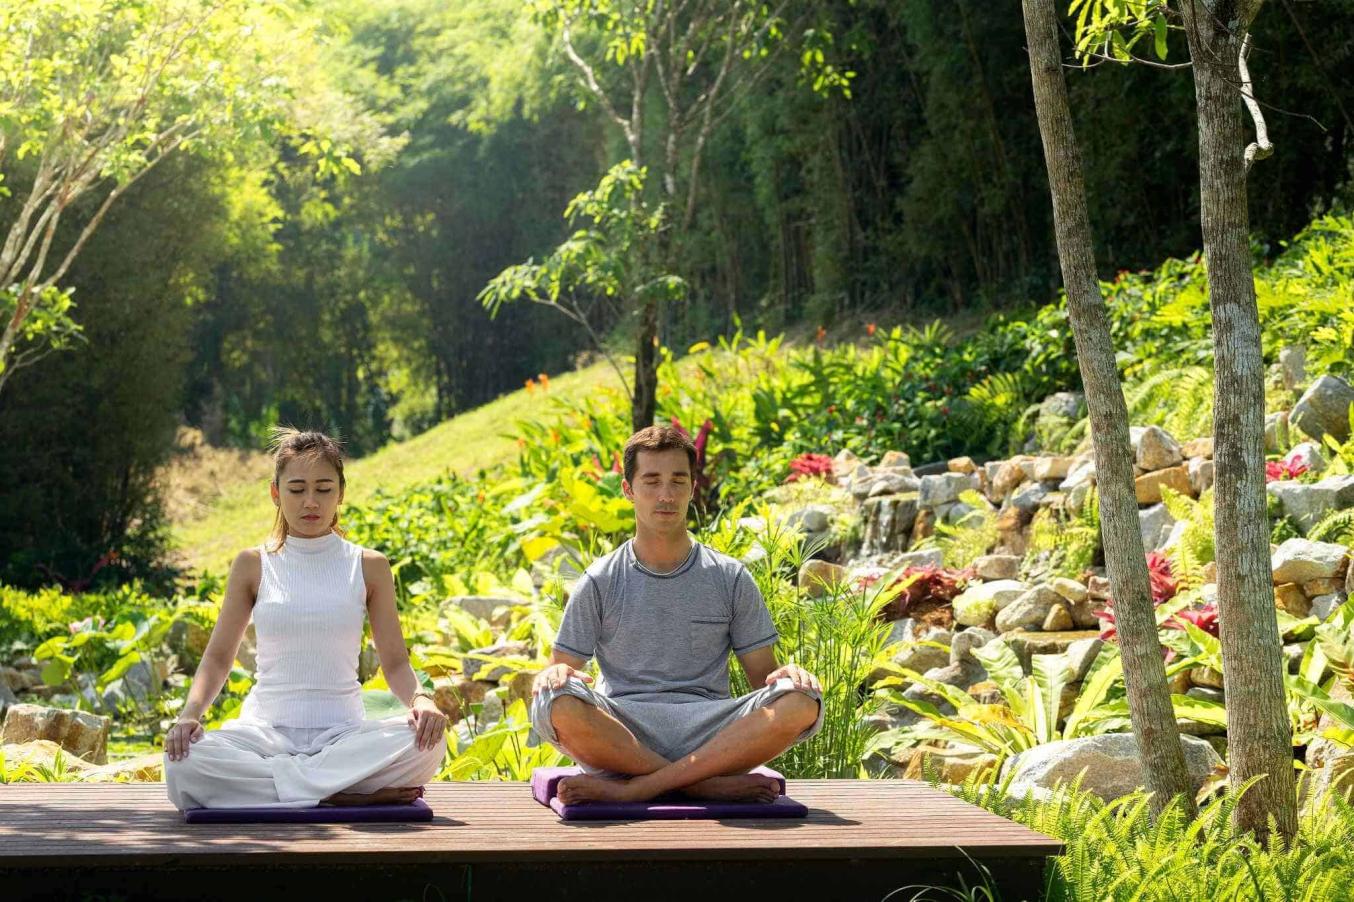 What Are The Benefits Of Attending A Spiritual Retreat?